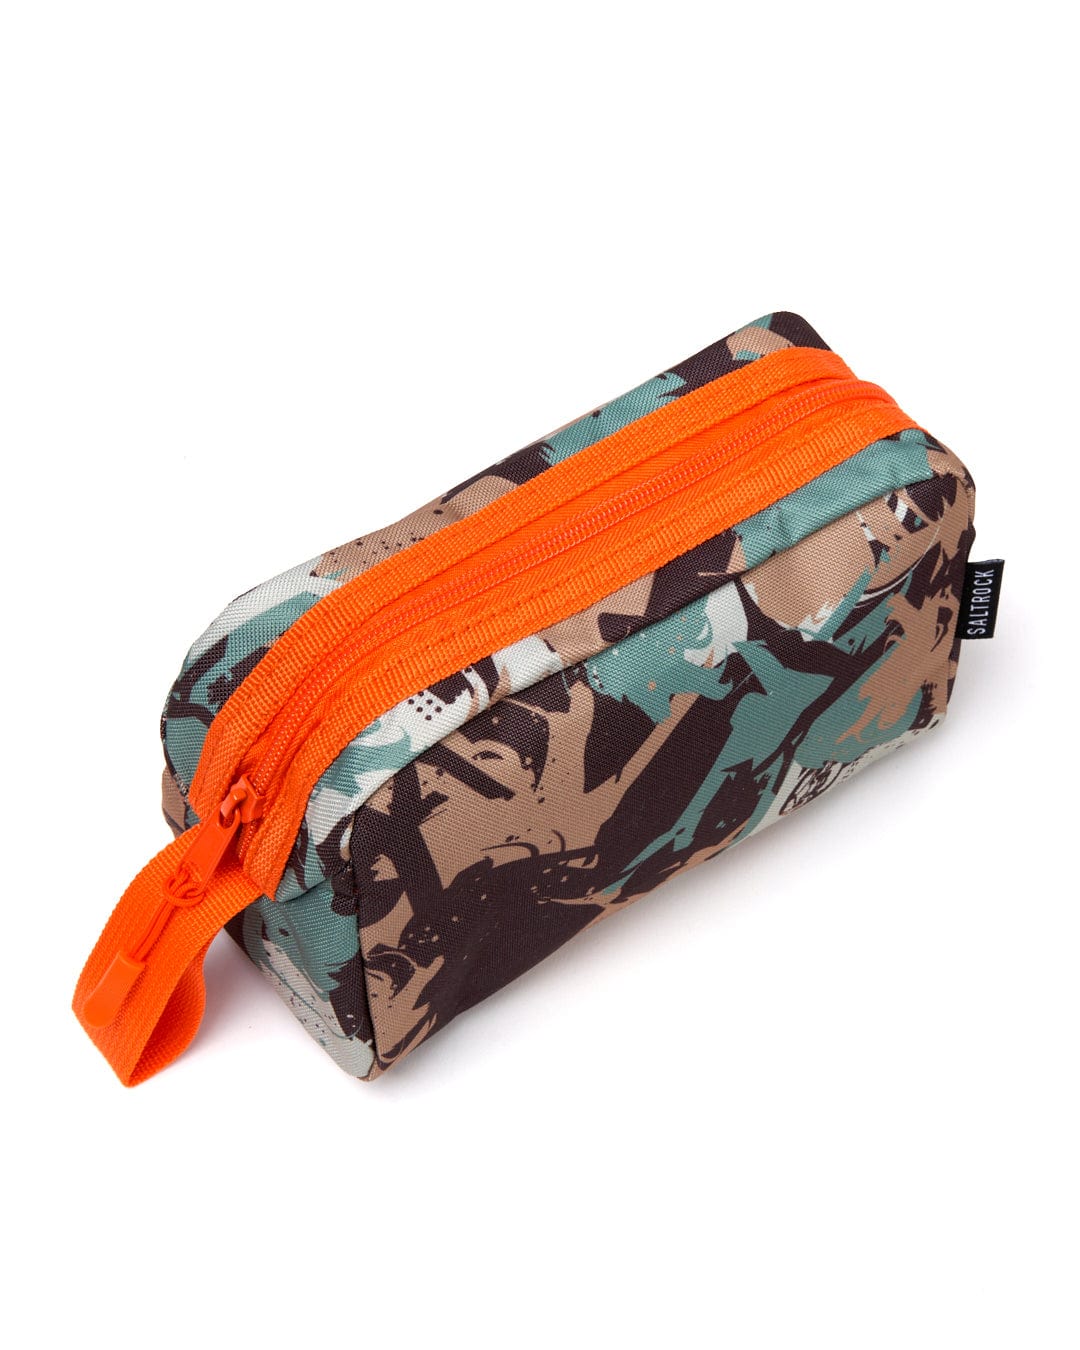 A small Camo pencil case from Saltrock with a contrasting orange zip, isolated on a white background.